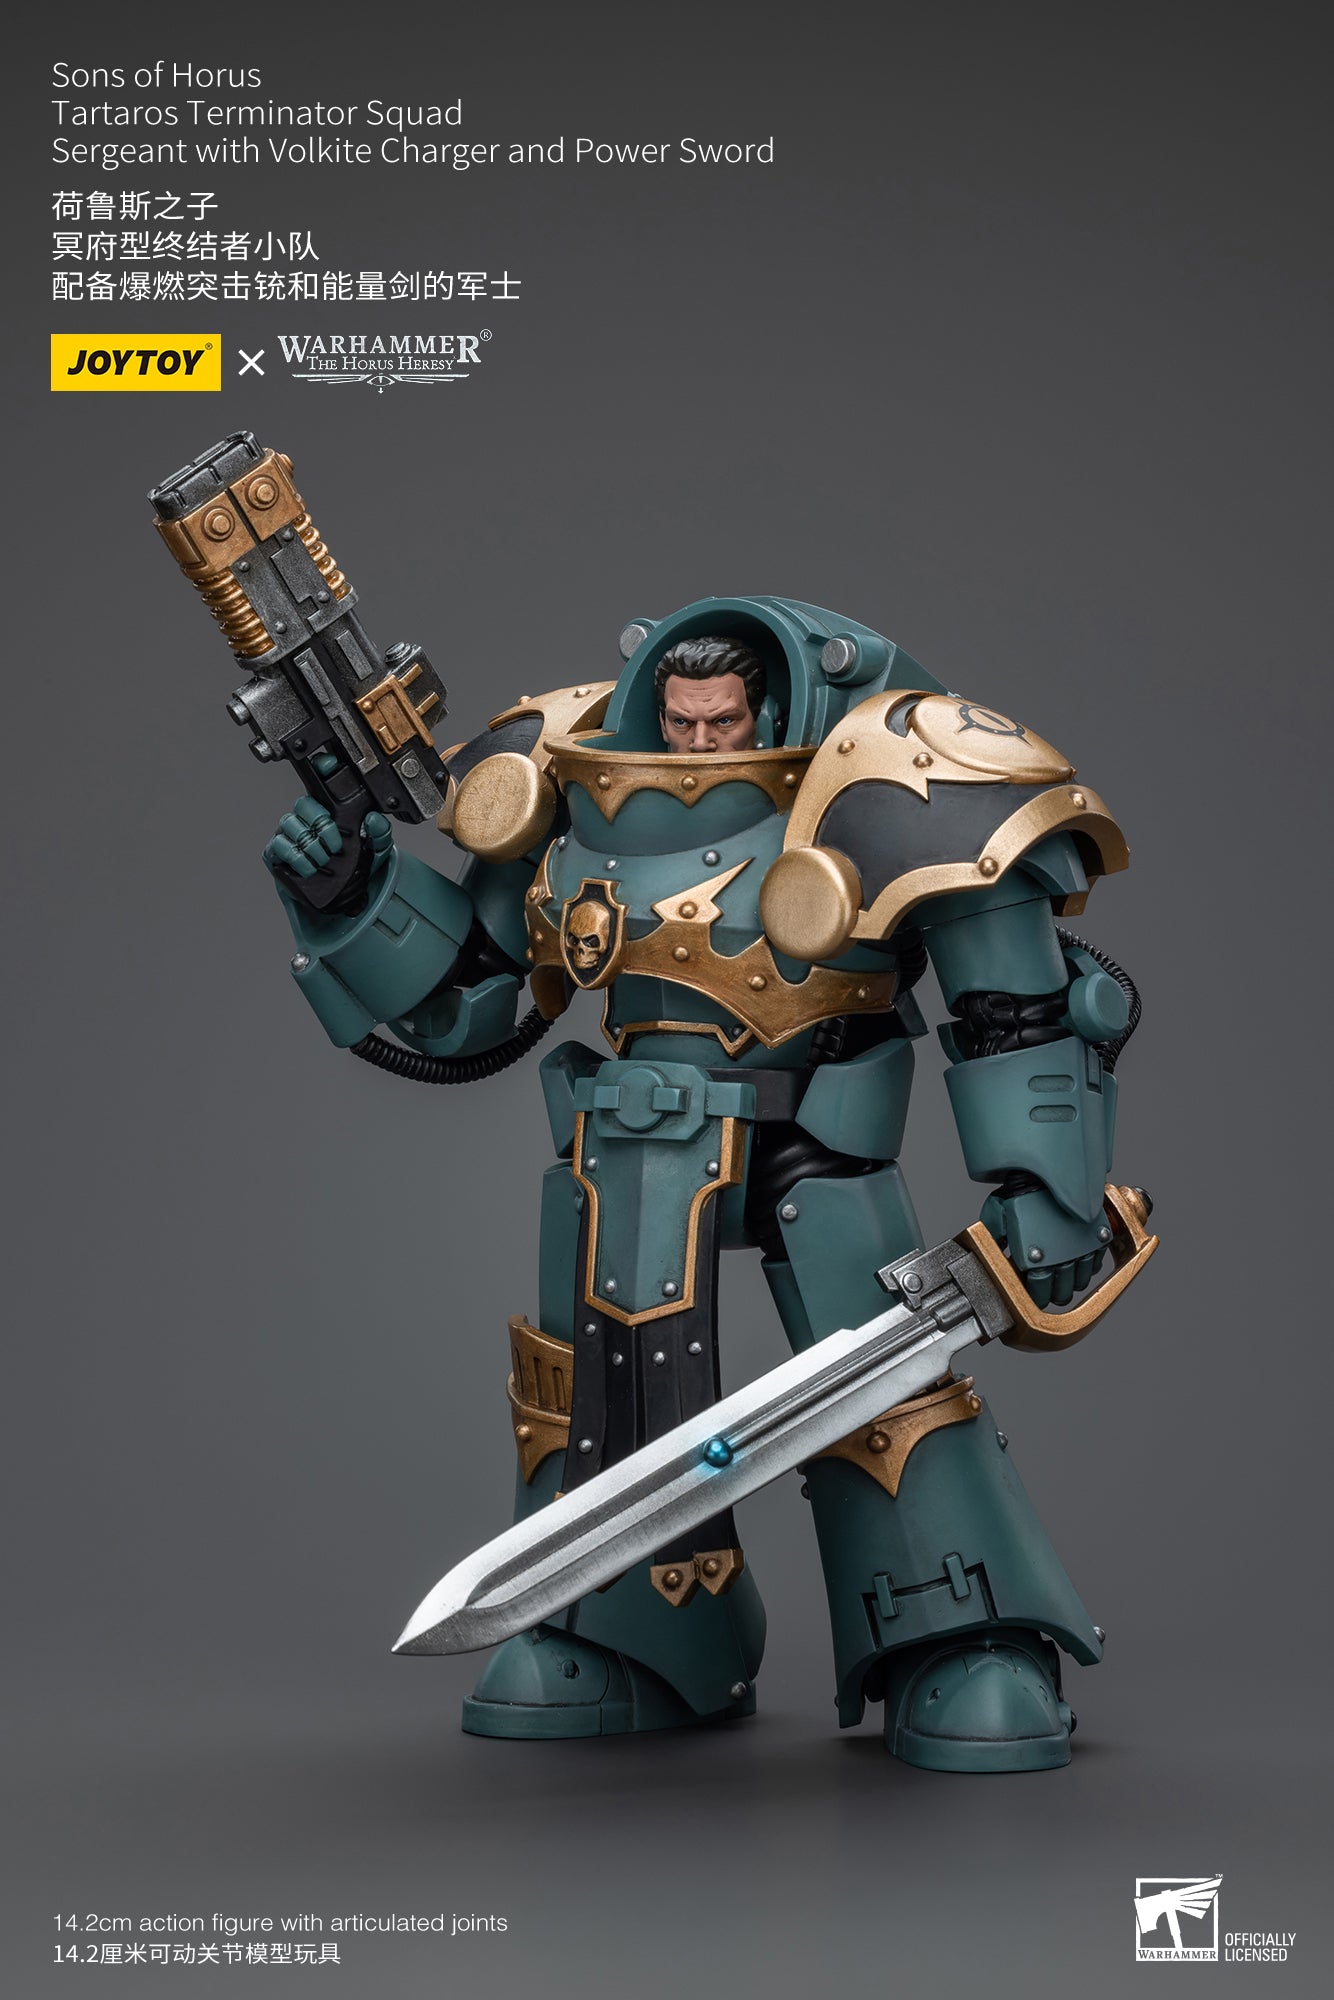 (Pre-Order) Warhammer The Horus Heresy Sons Of Horus Tartaros Terminator Squad Sergeant With Volkite Charger And Power Sword